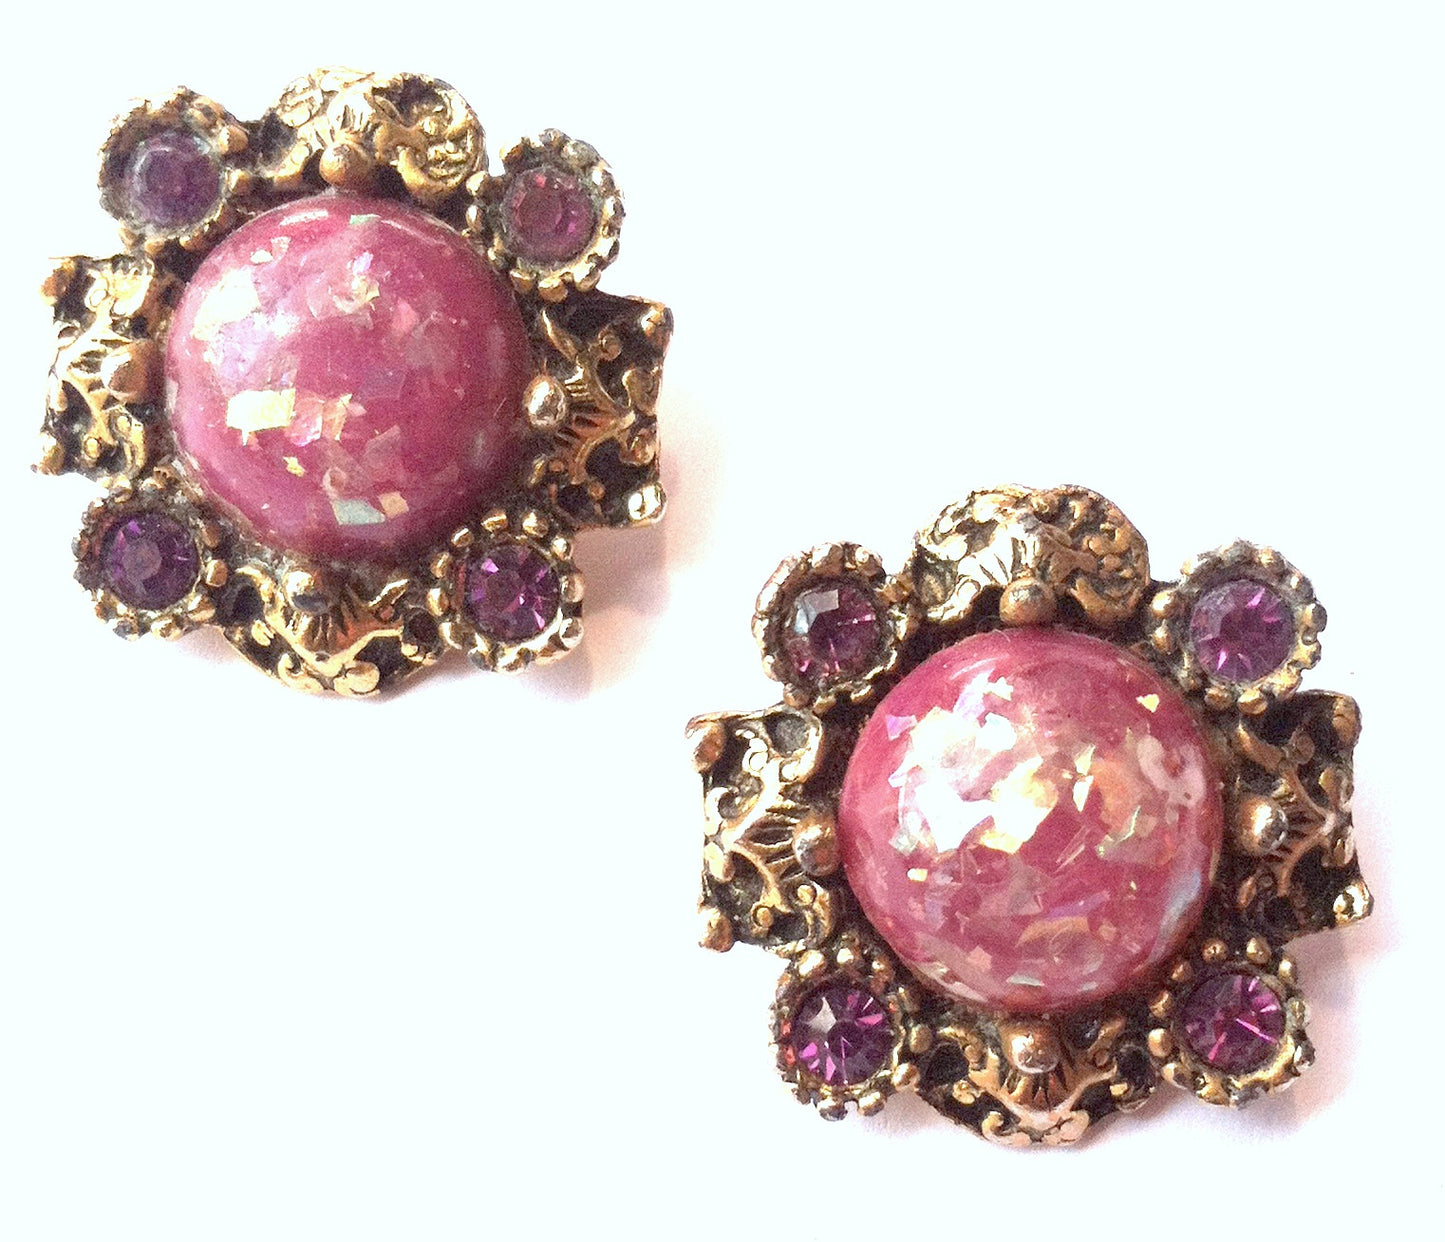 Glittery Rosy Violet Cabochon Clip Earrings circa 1940s